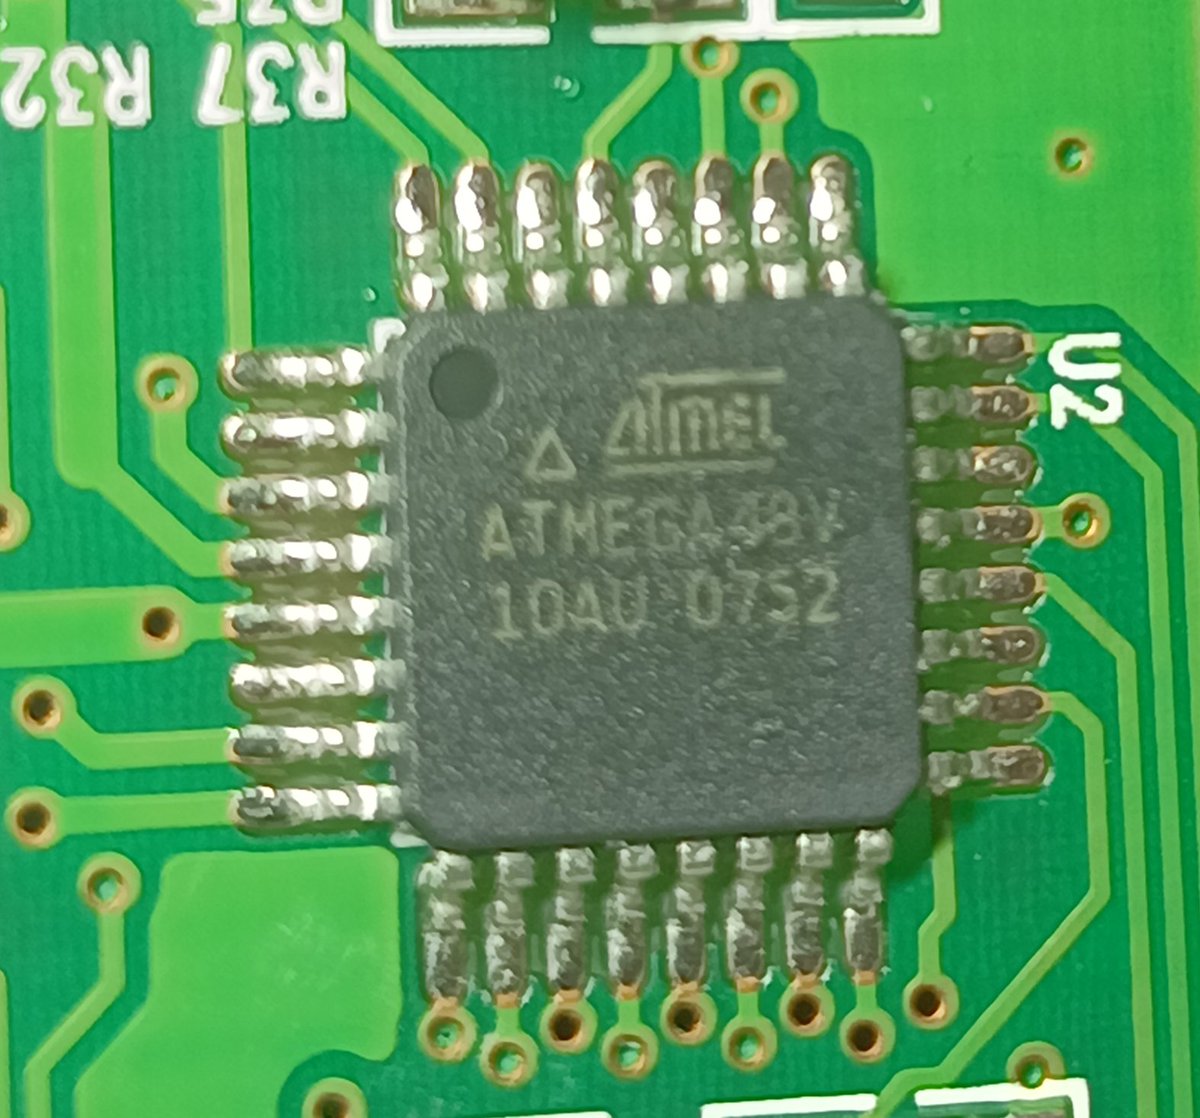 And the other chip is an Atmel ATMEGA48V.That's the well-known AVR series of 8-bit microcontrollers.So this is basically an Arduino. Cool.